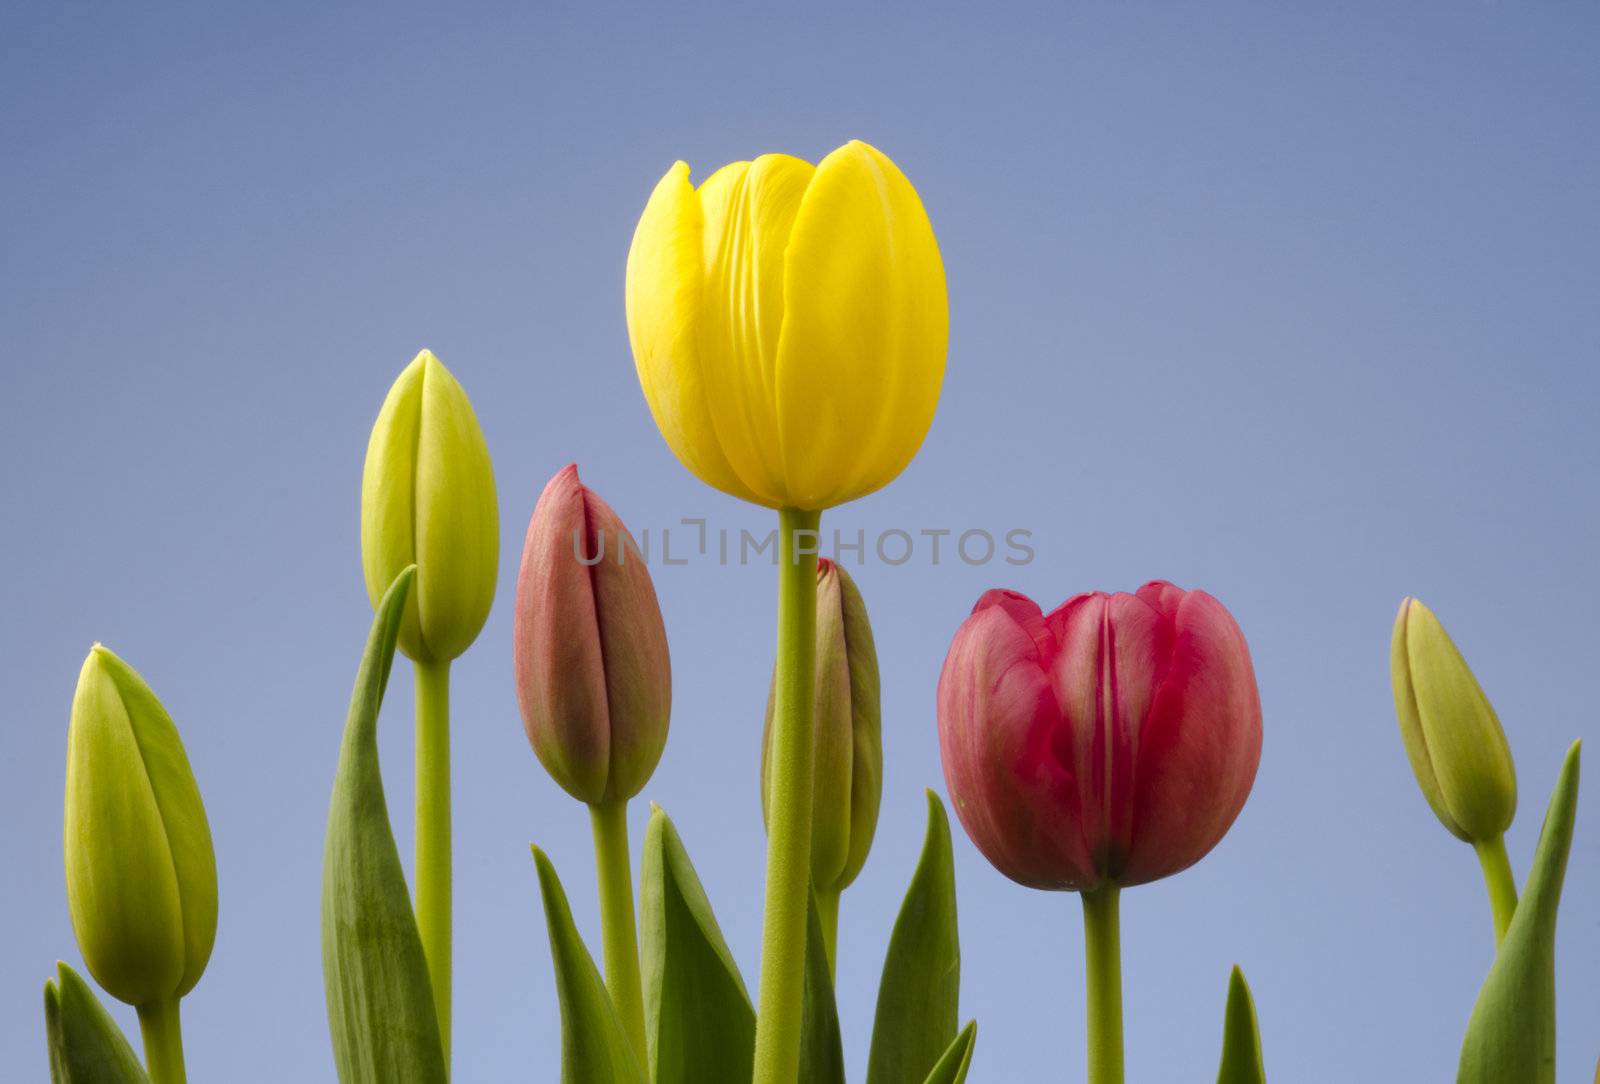 Tulips at different stages of blooming with a blue sky background